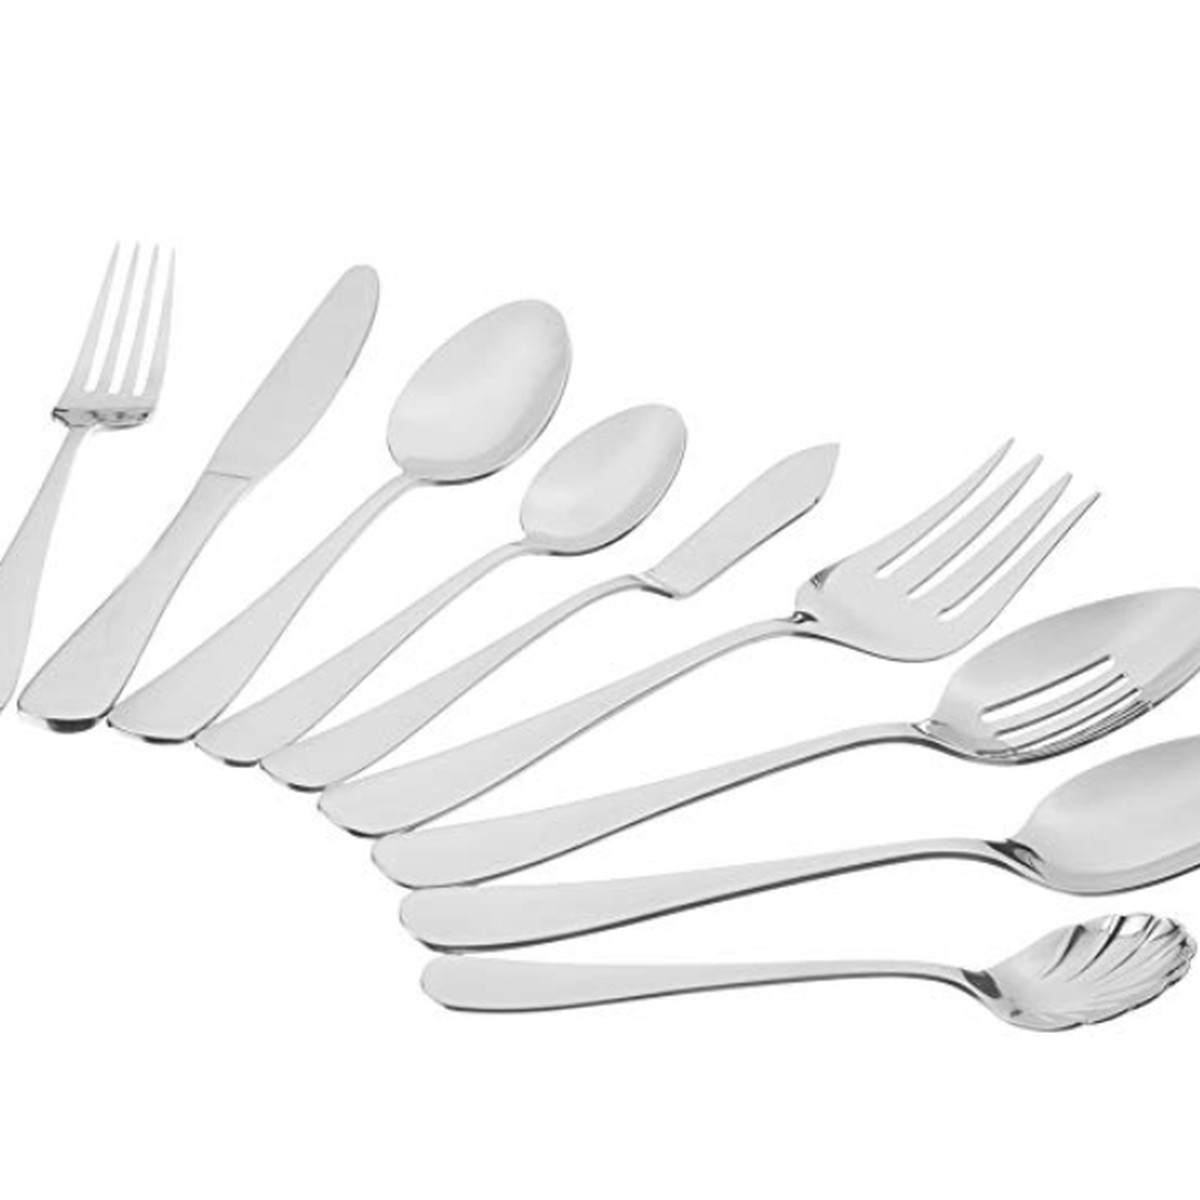 A spread of silver silverware includes forks, spoons, and serving ware. 